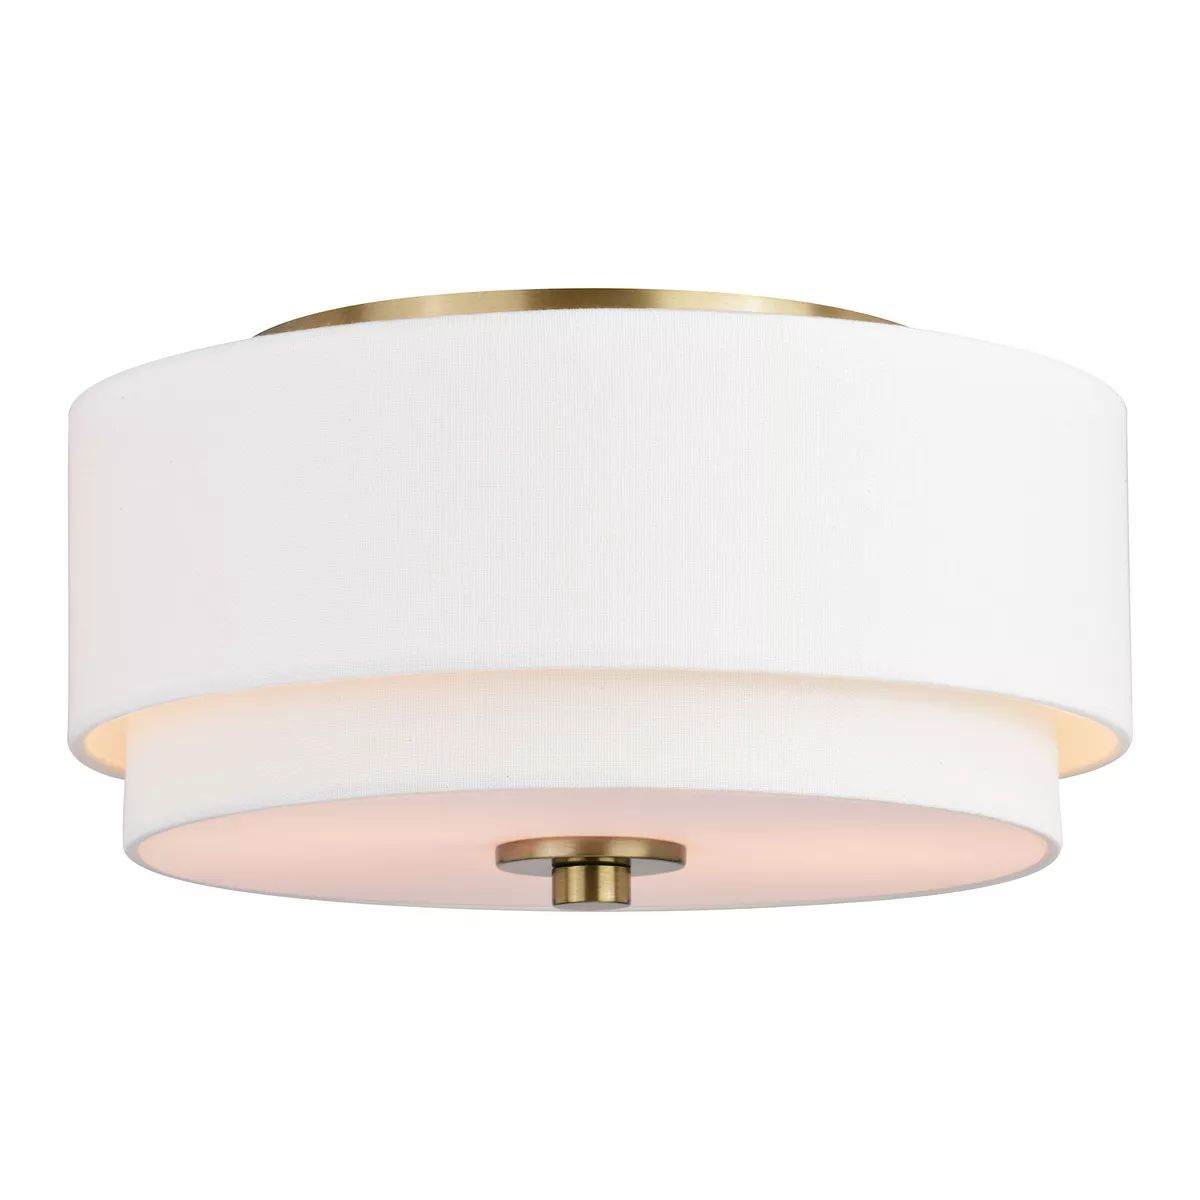 Burnaby 13-in W Mid-Century Modern Flush Mount Ceiling Light Fixture White Fabric Drum Shade | Kohl's